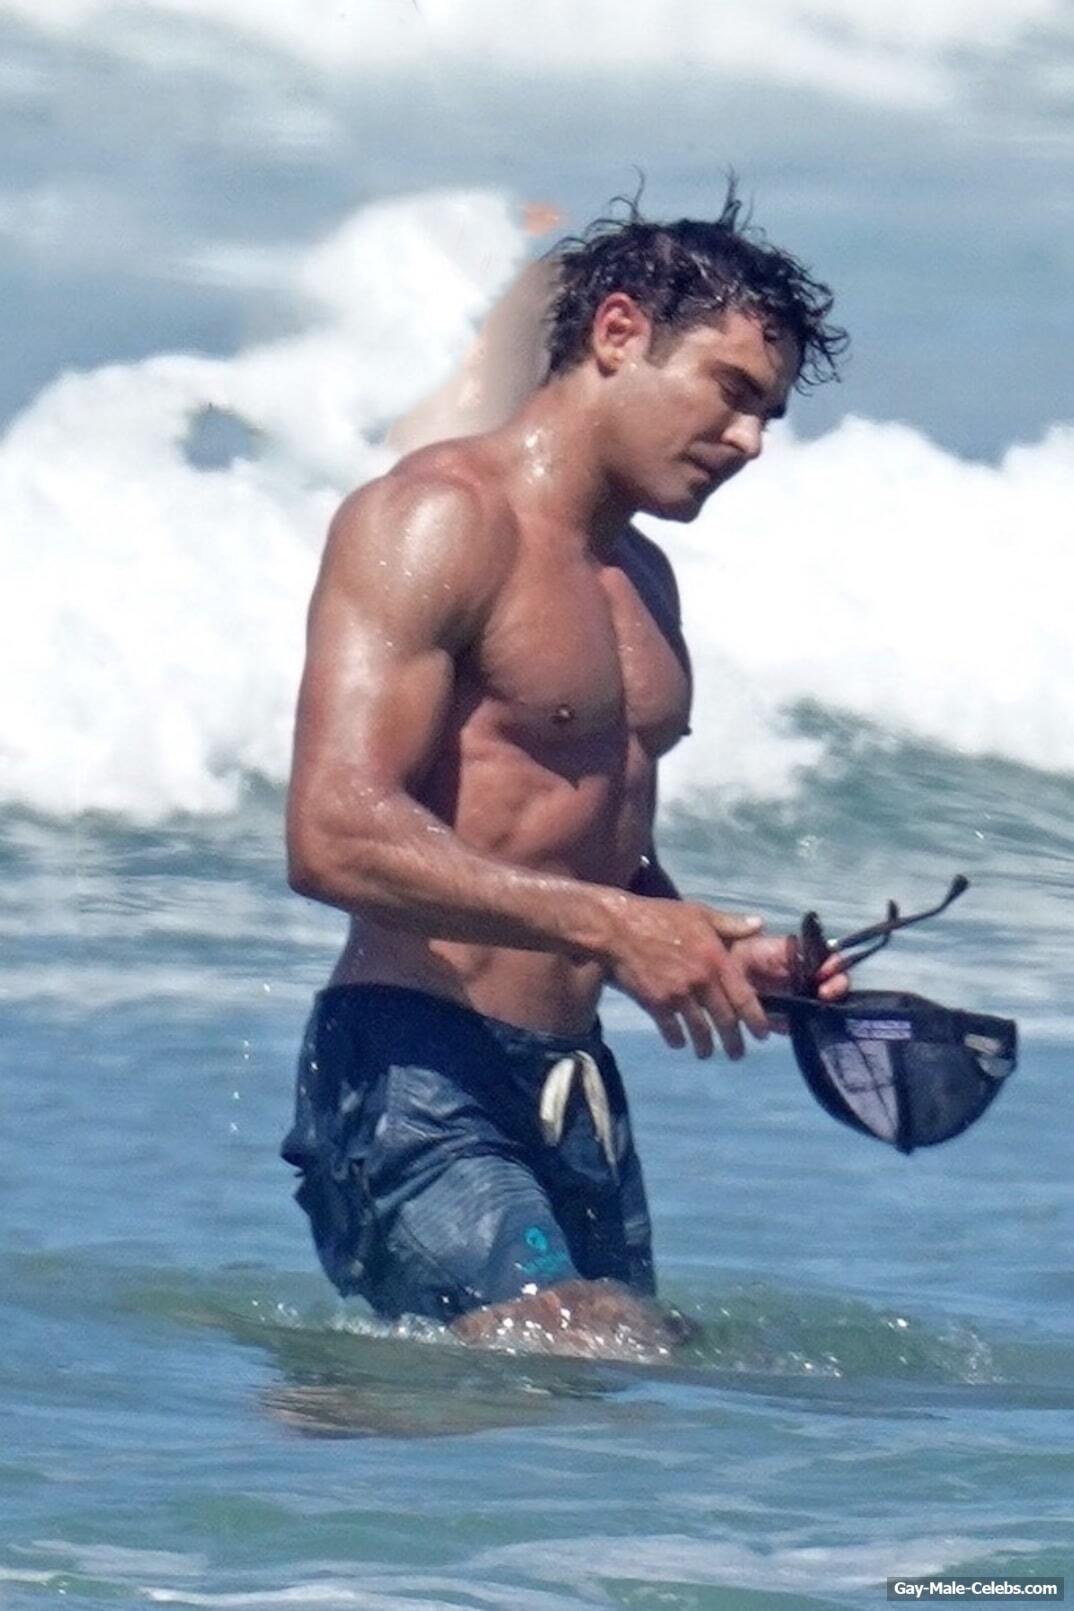 Zac Efron Strong ABS And Bulge in Costa Rica